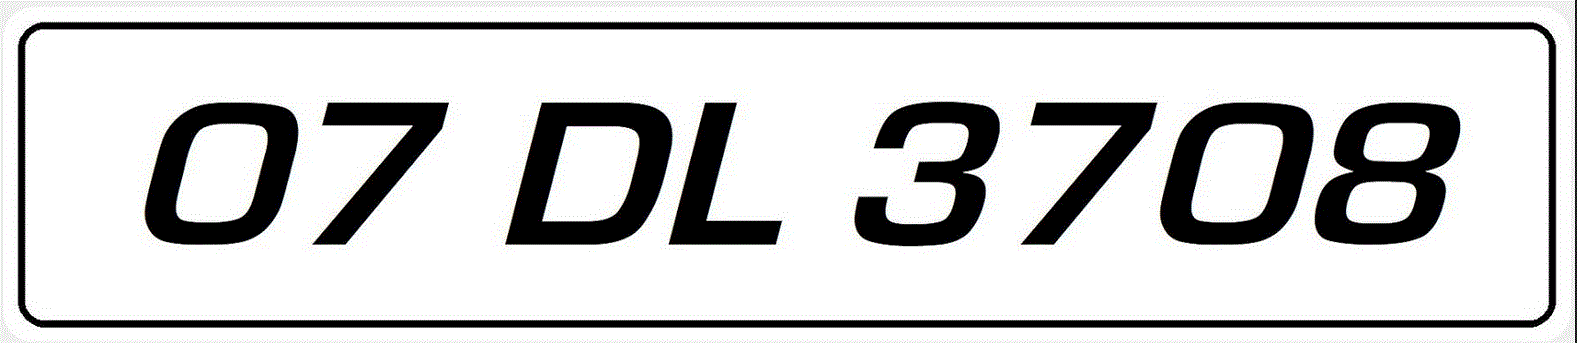 Eurostile Font on small white acrylic plate - 330mm x 75mm (Single) 